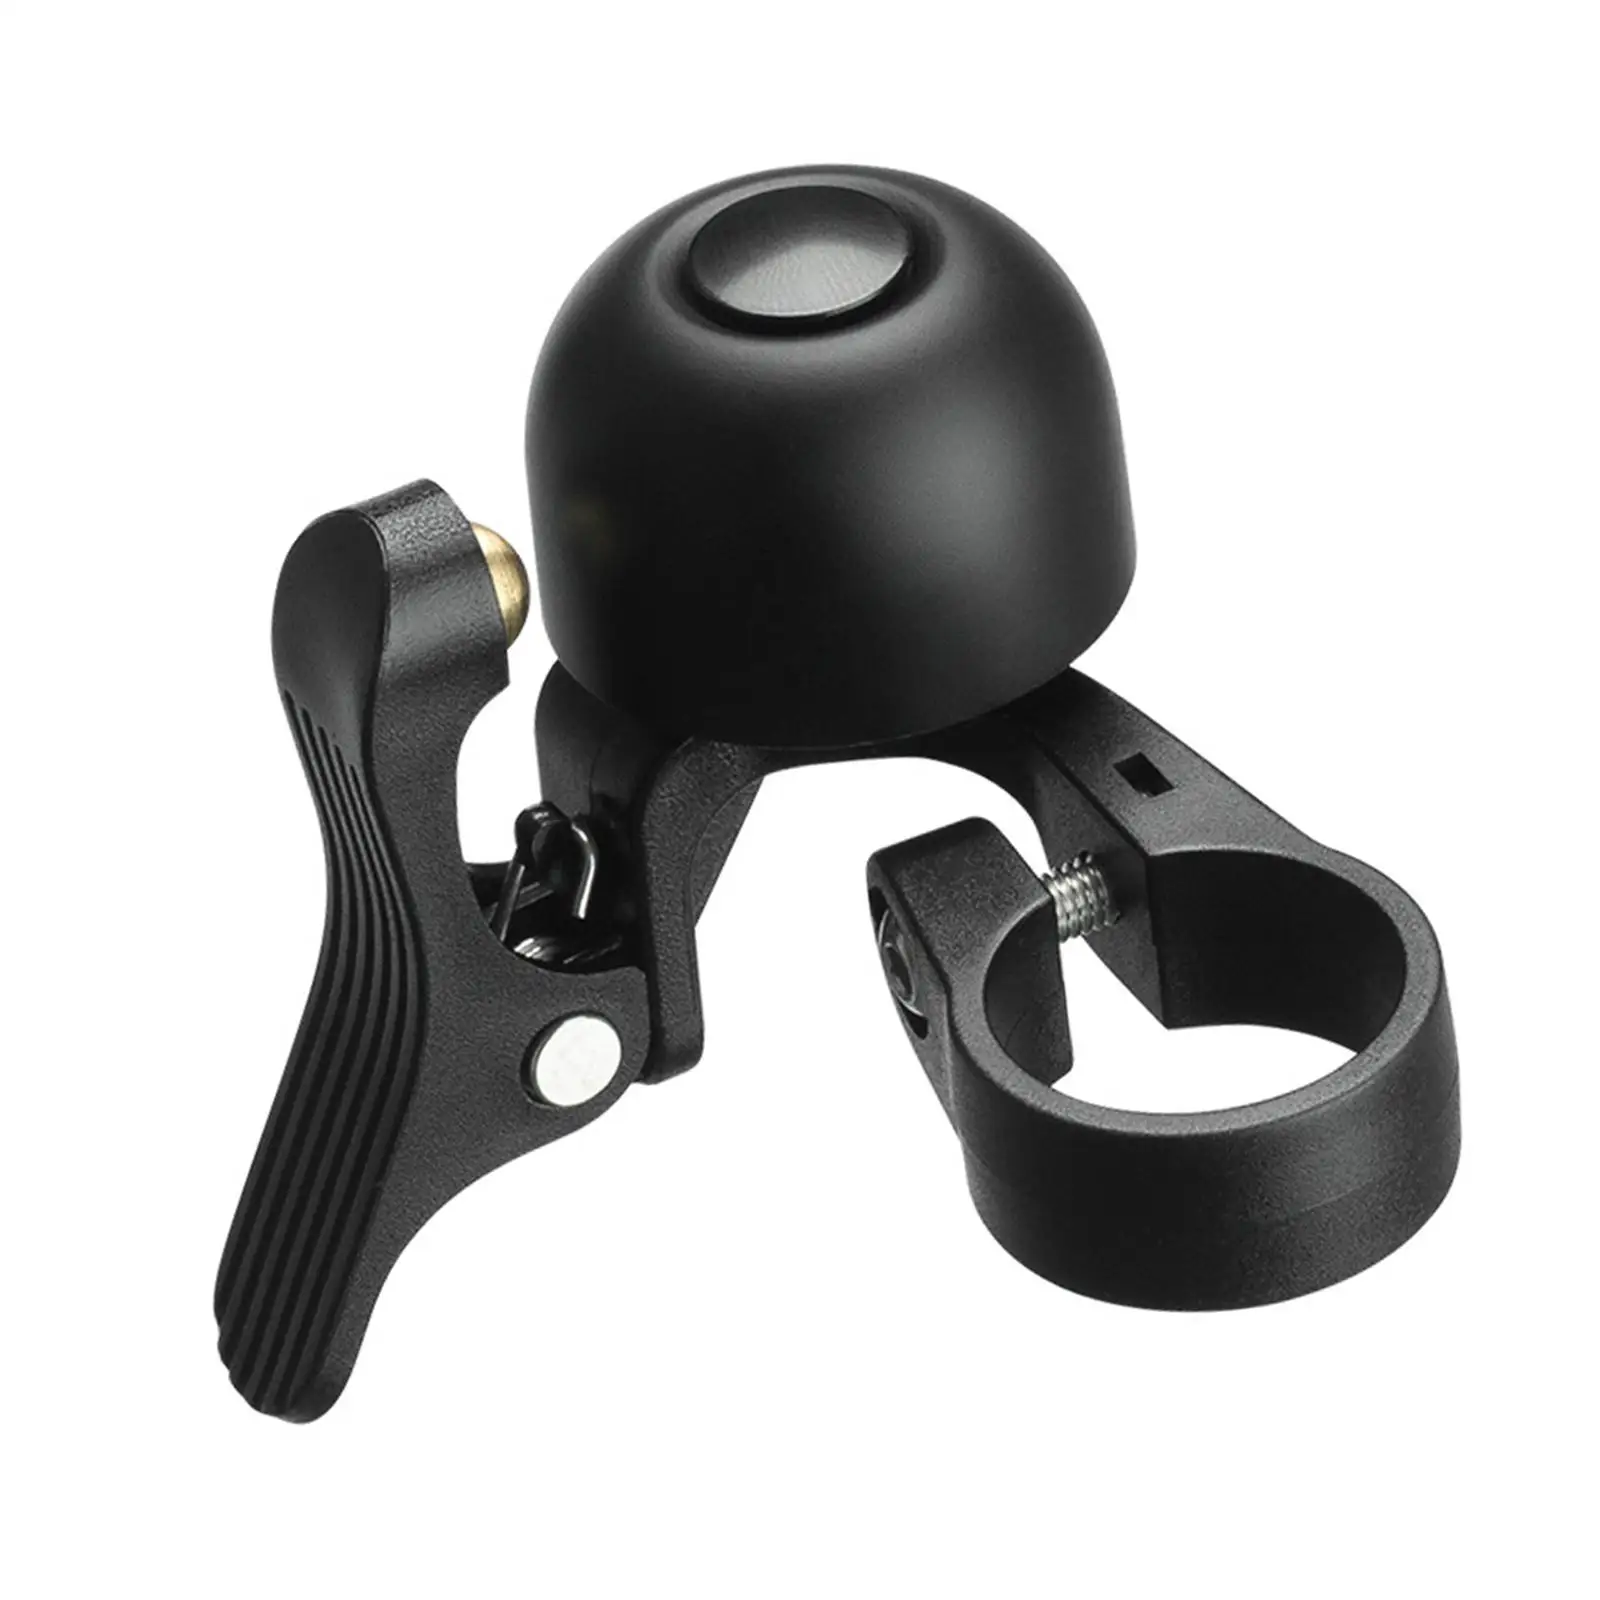 Bicycle Bell Aluminum Alloy Easy to Install Durable Kids Adults Clear Sound Mini Bike Bell Handlebar Bell for Road Bike Supplies